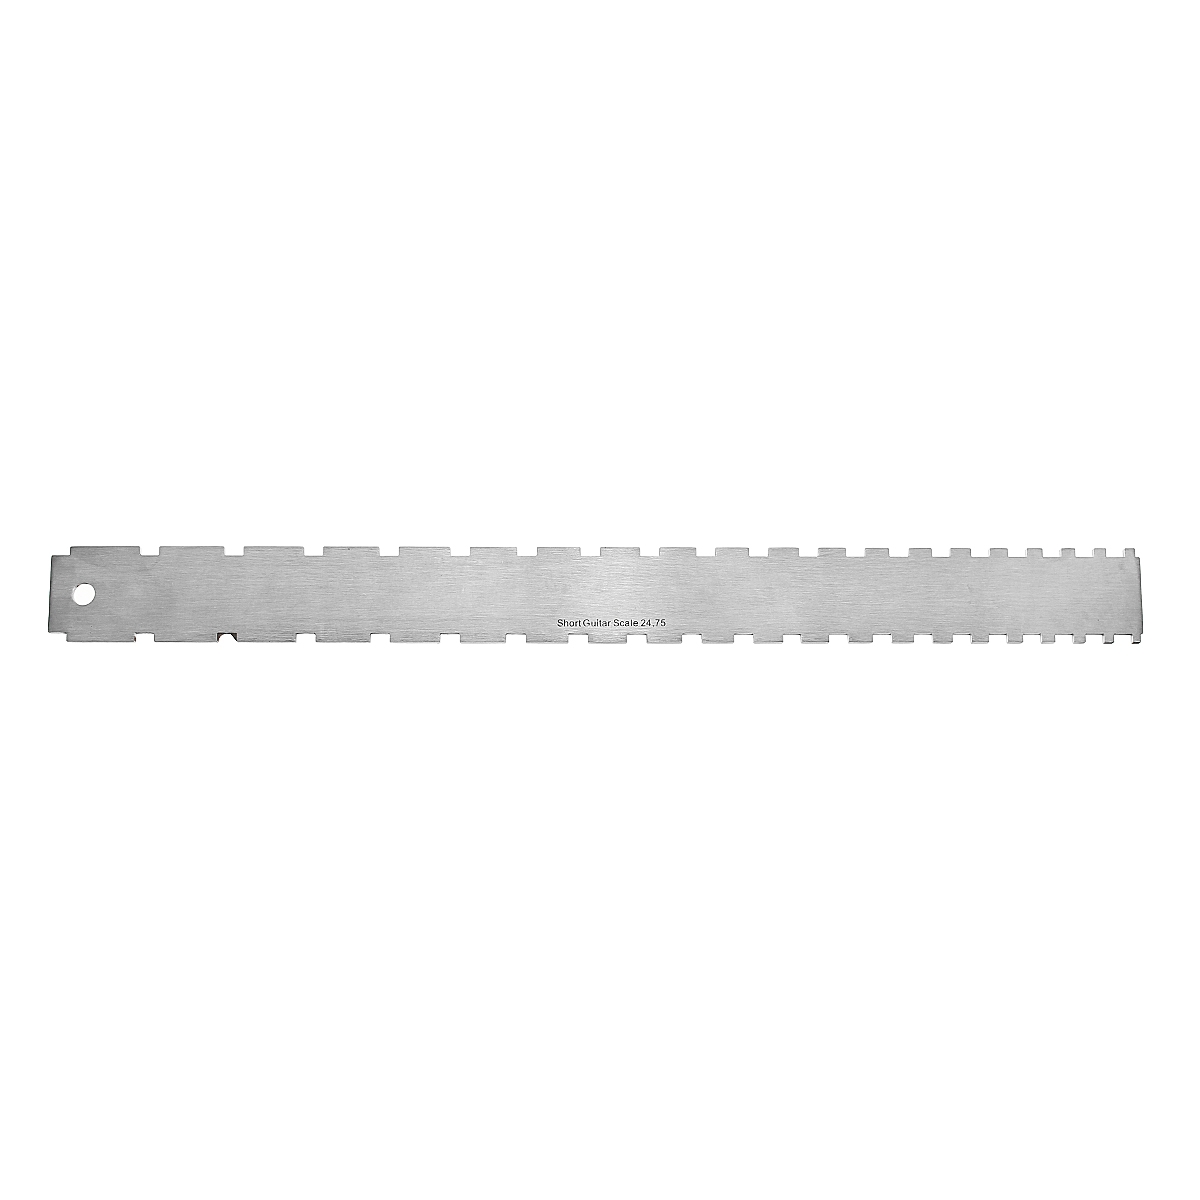 Stainless Steel Guitar Neck Notched Straight Edge Dual Scale Measuring Tool Guitar Fret Ruler for Measuring Fretboard